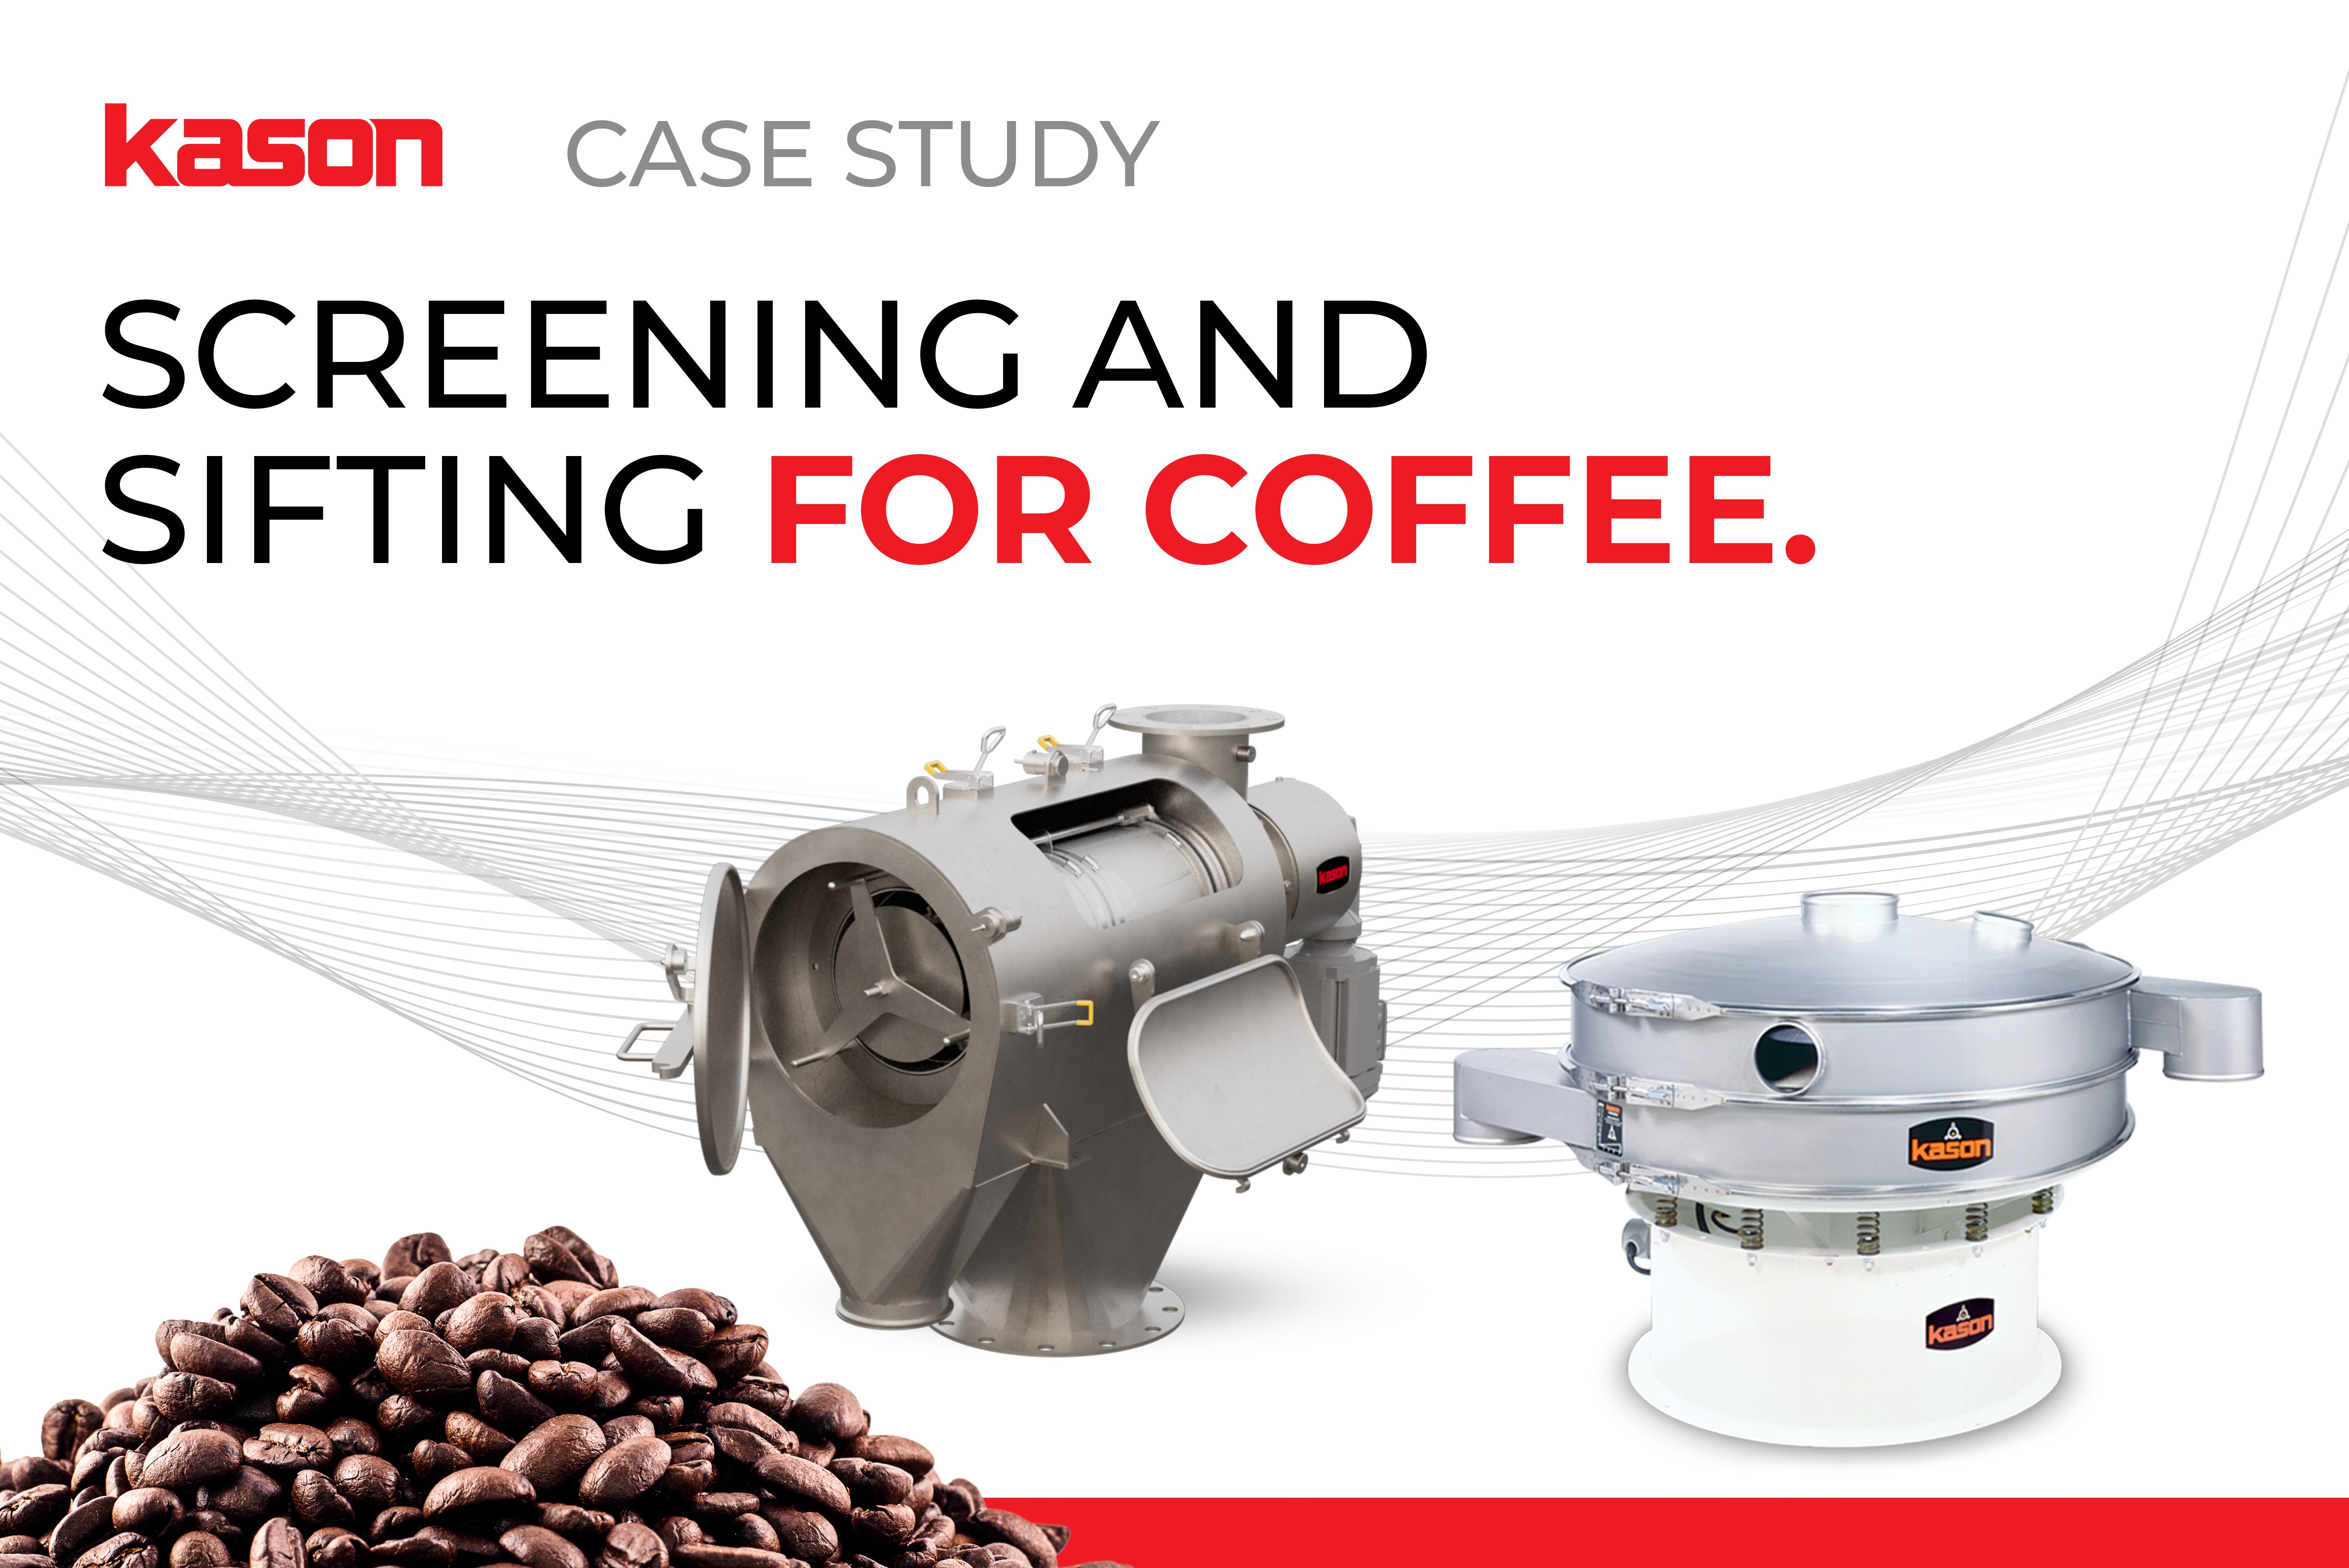 Kason Vibroscreen and Centrisifter equipment with mound of coffee beans